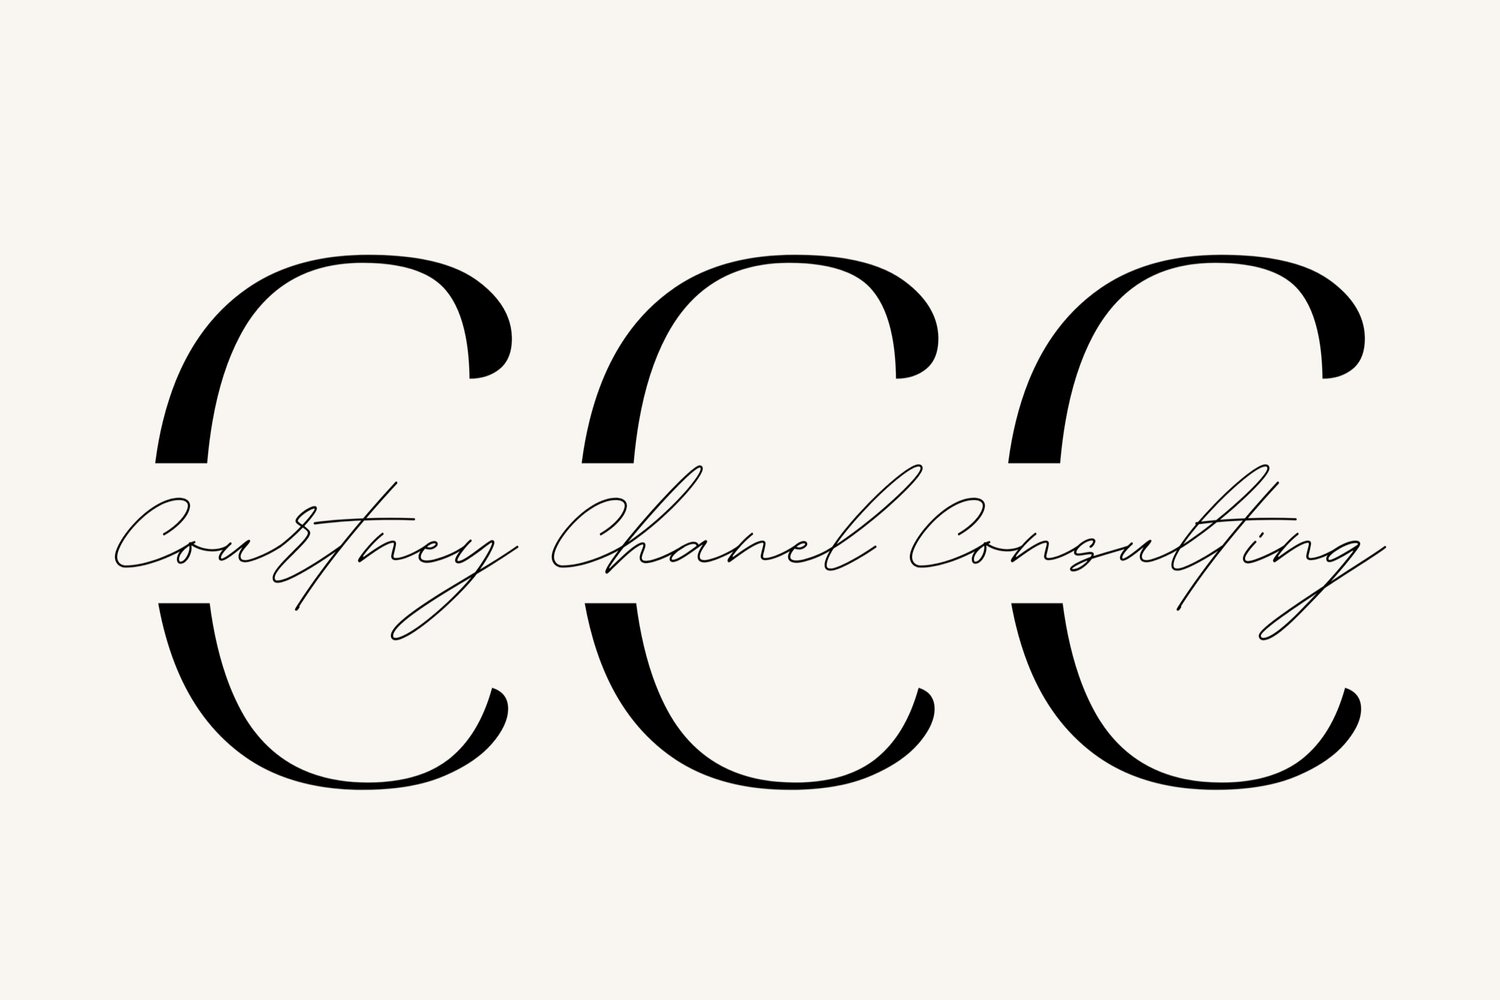 COURTNEY CHANEL CONSULTING